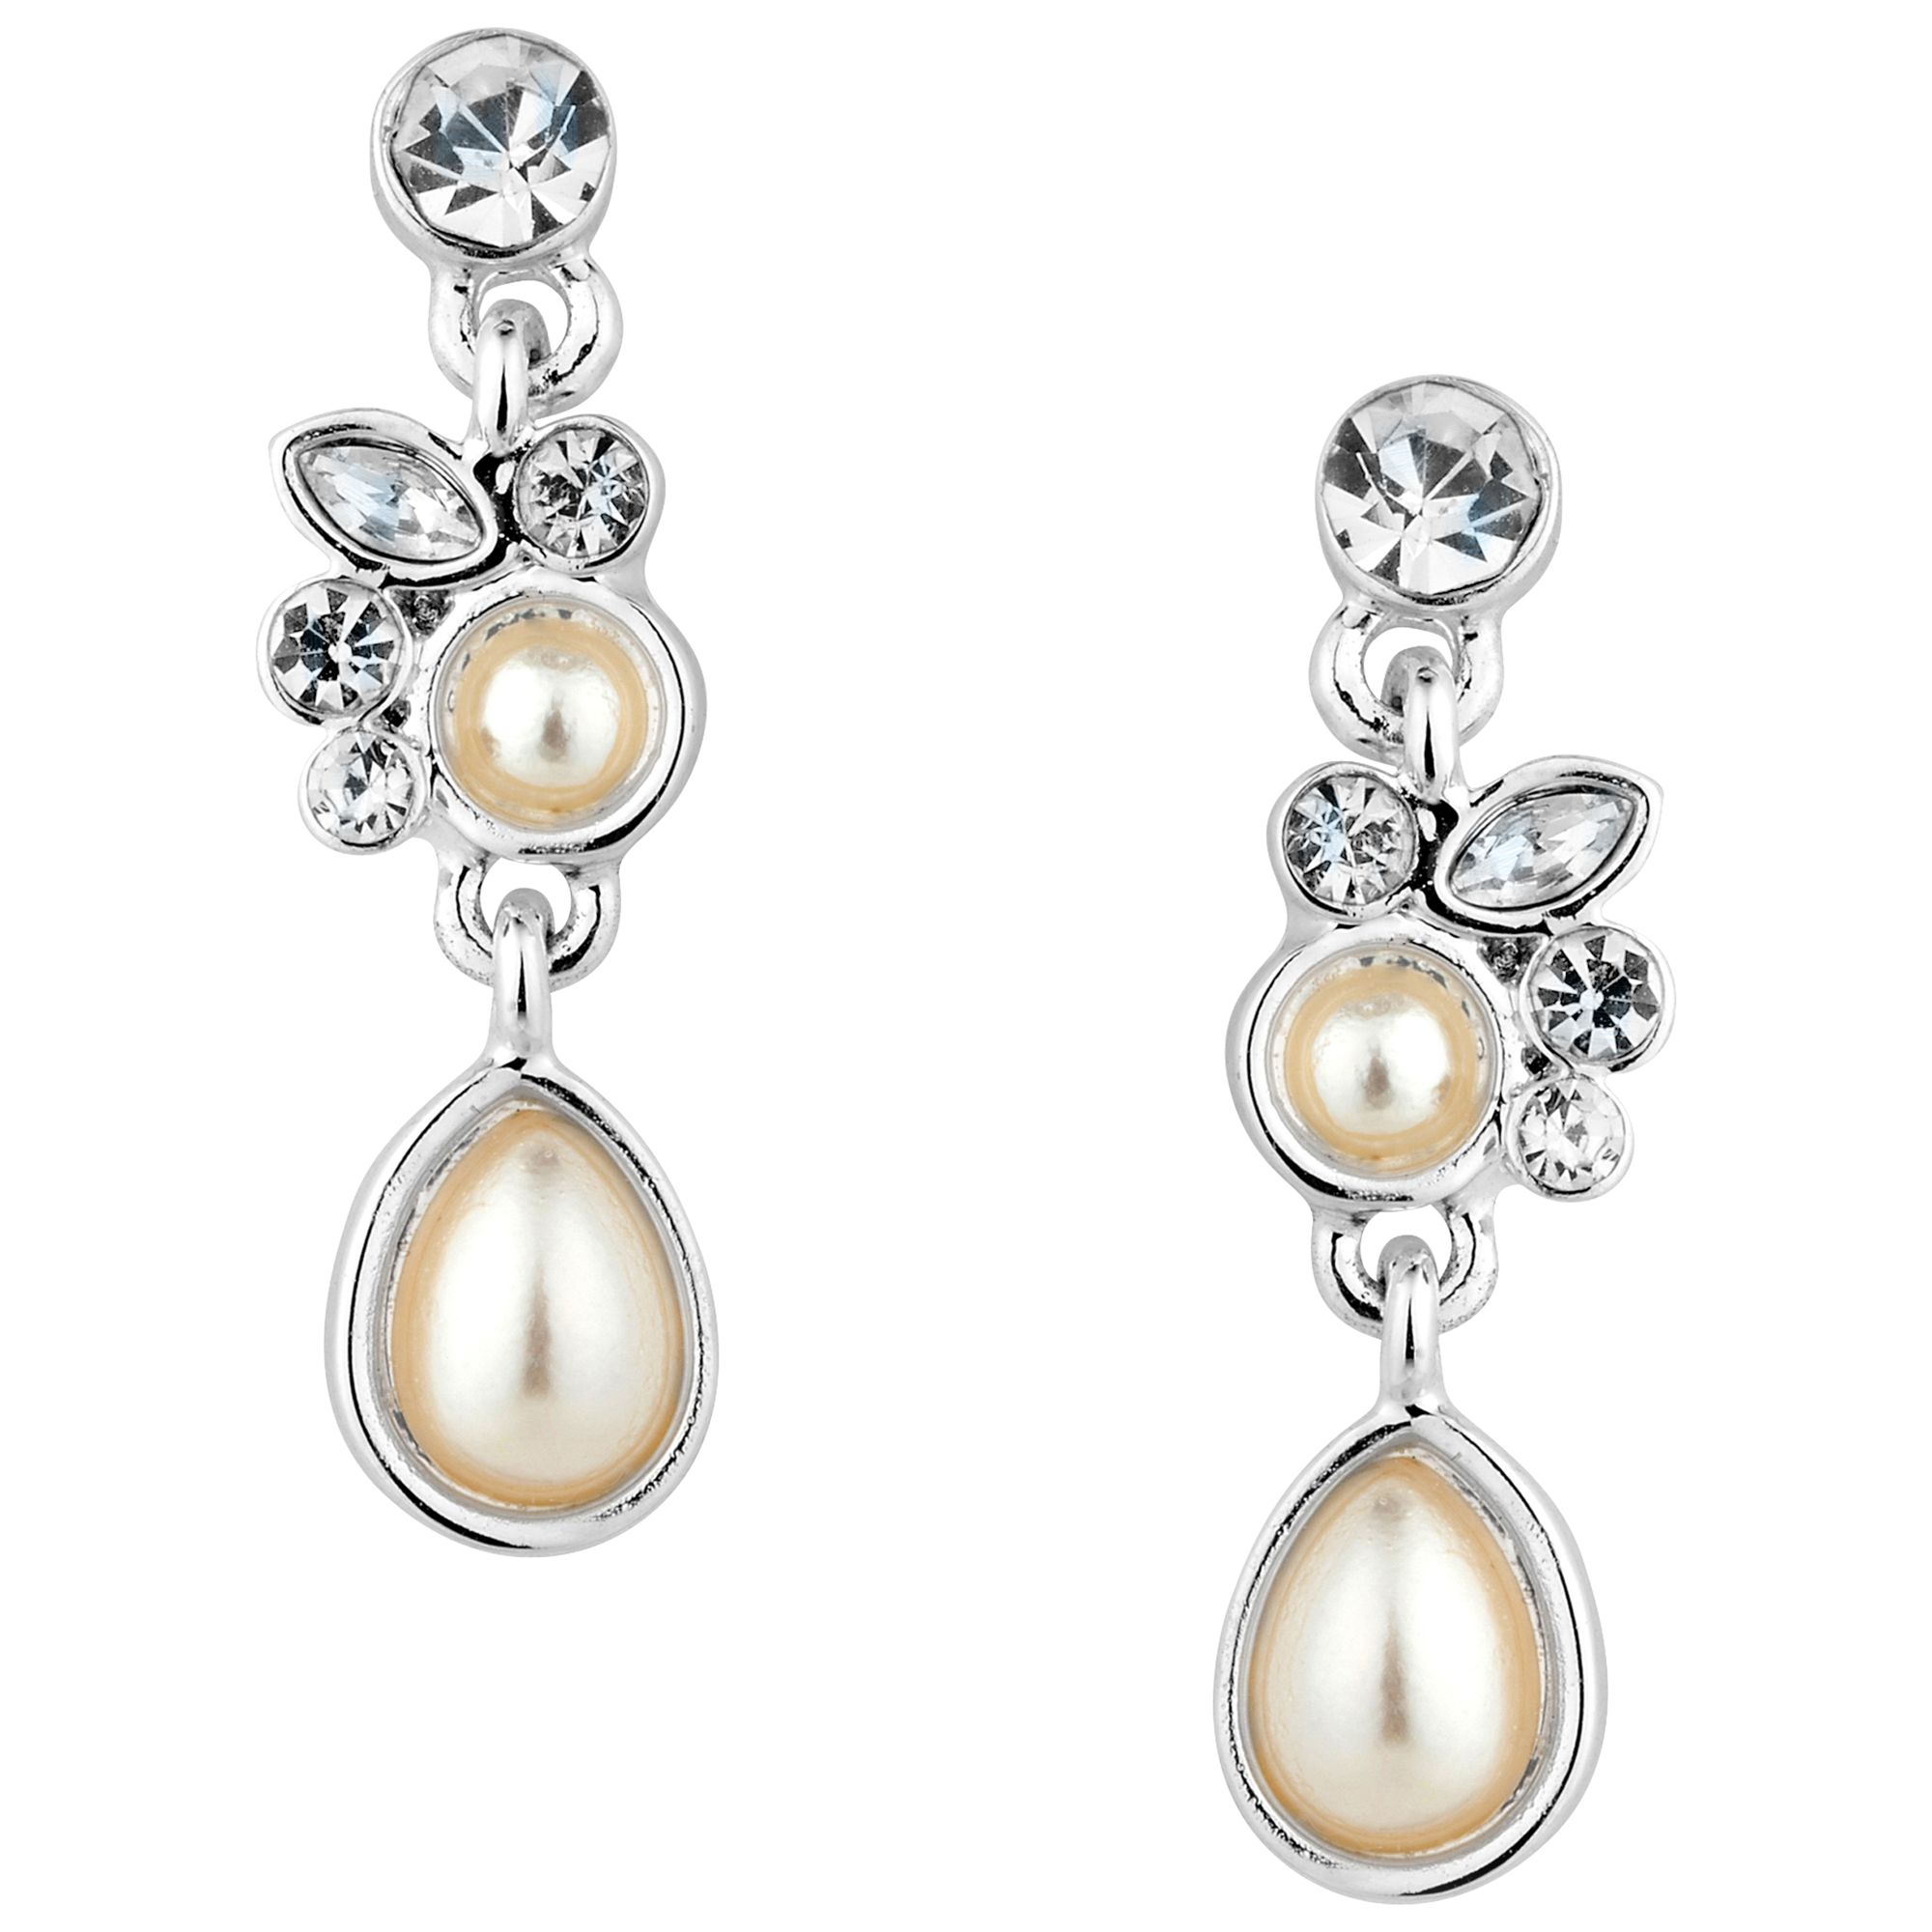 Buy Alan Hannah Silver Plated Freshwater Pearl And Crystal Drop Earrings Online at johnlewis.com